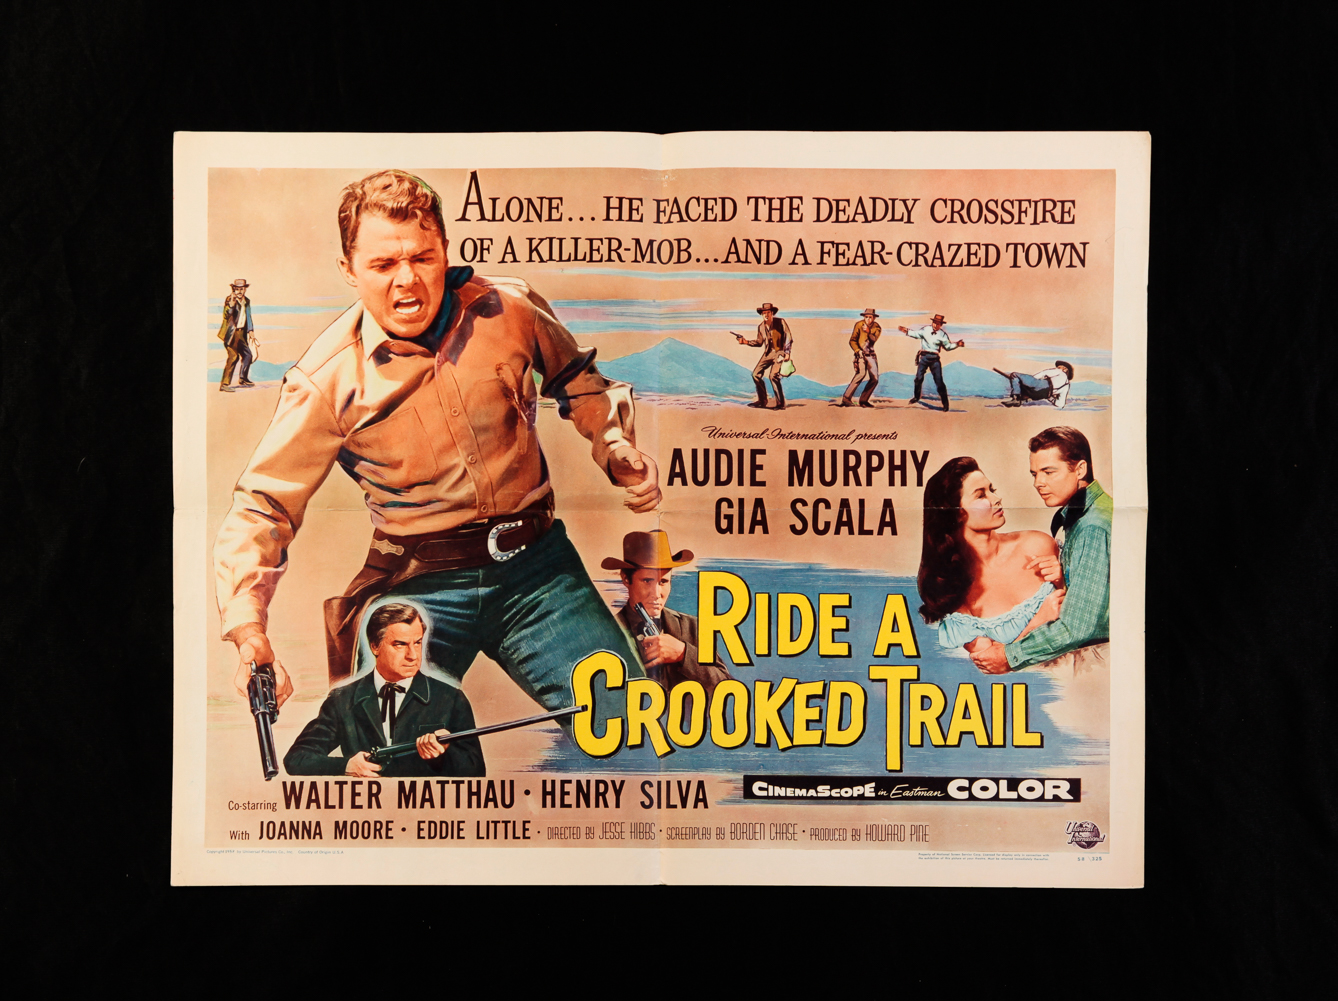 RIDE A CROOKED TRAIL (1958). Universal